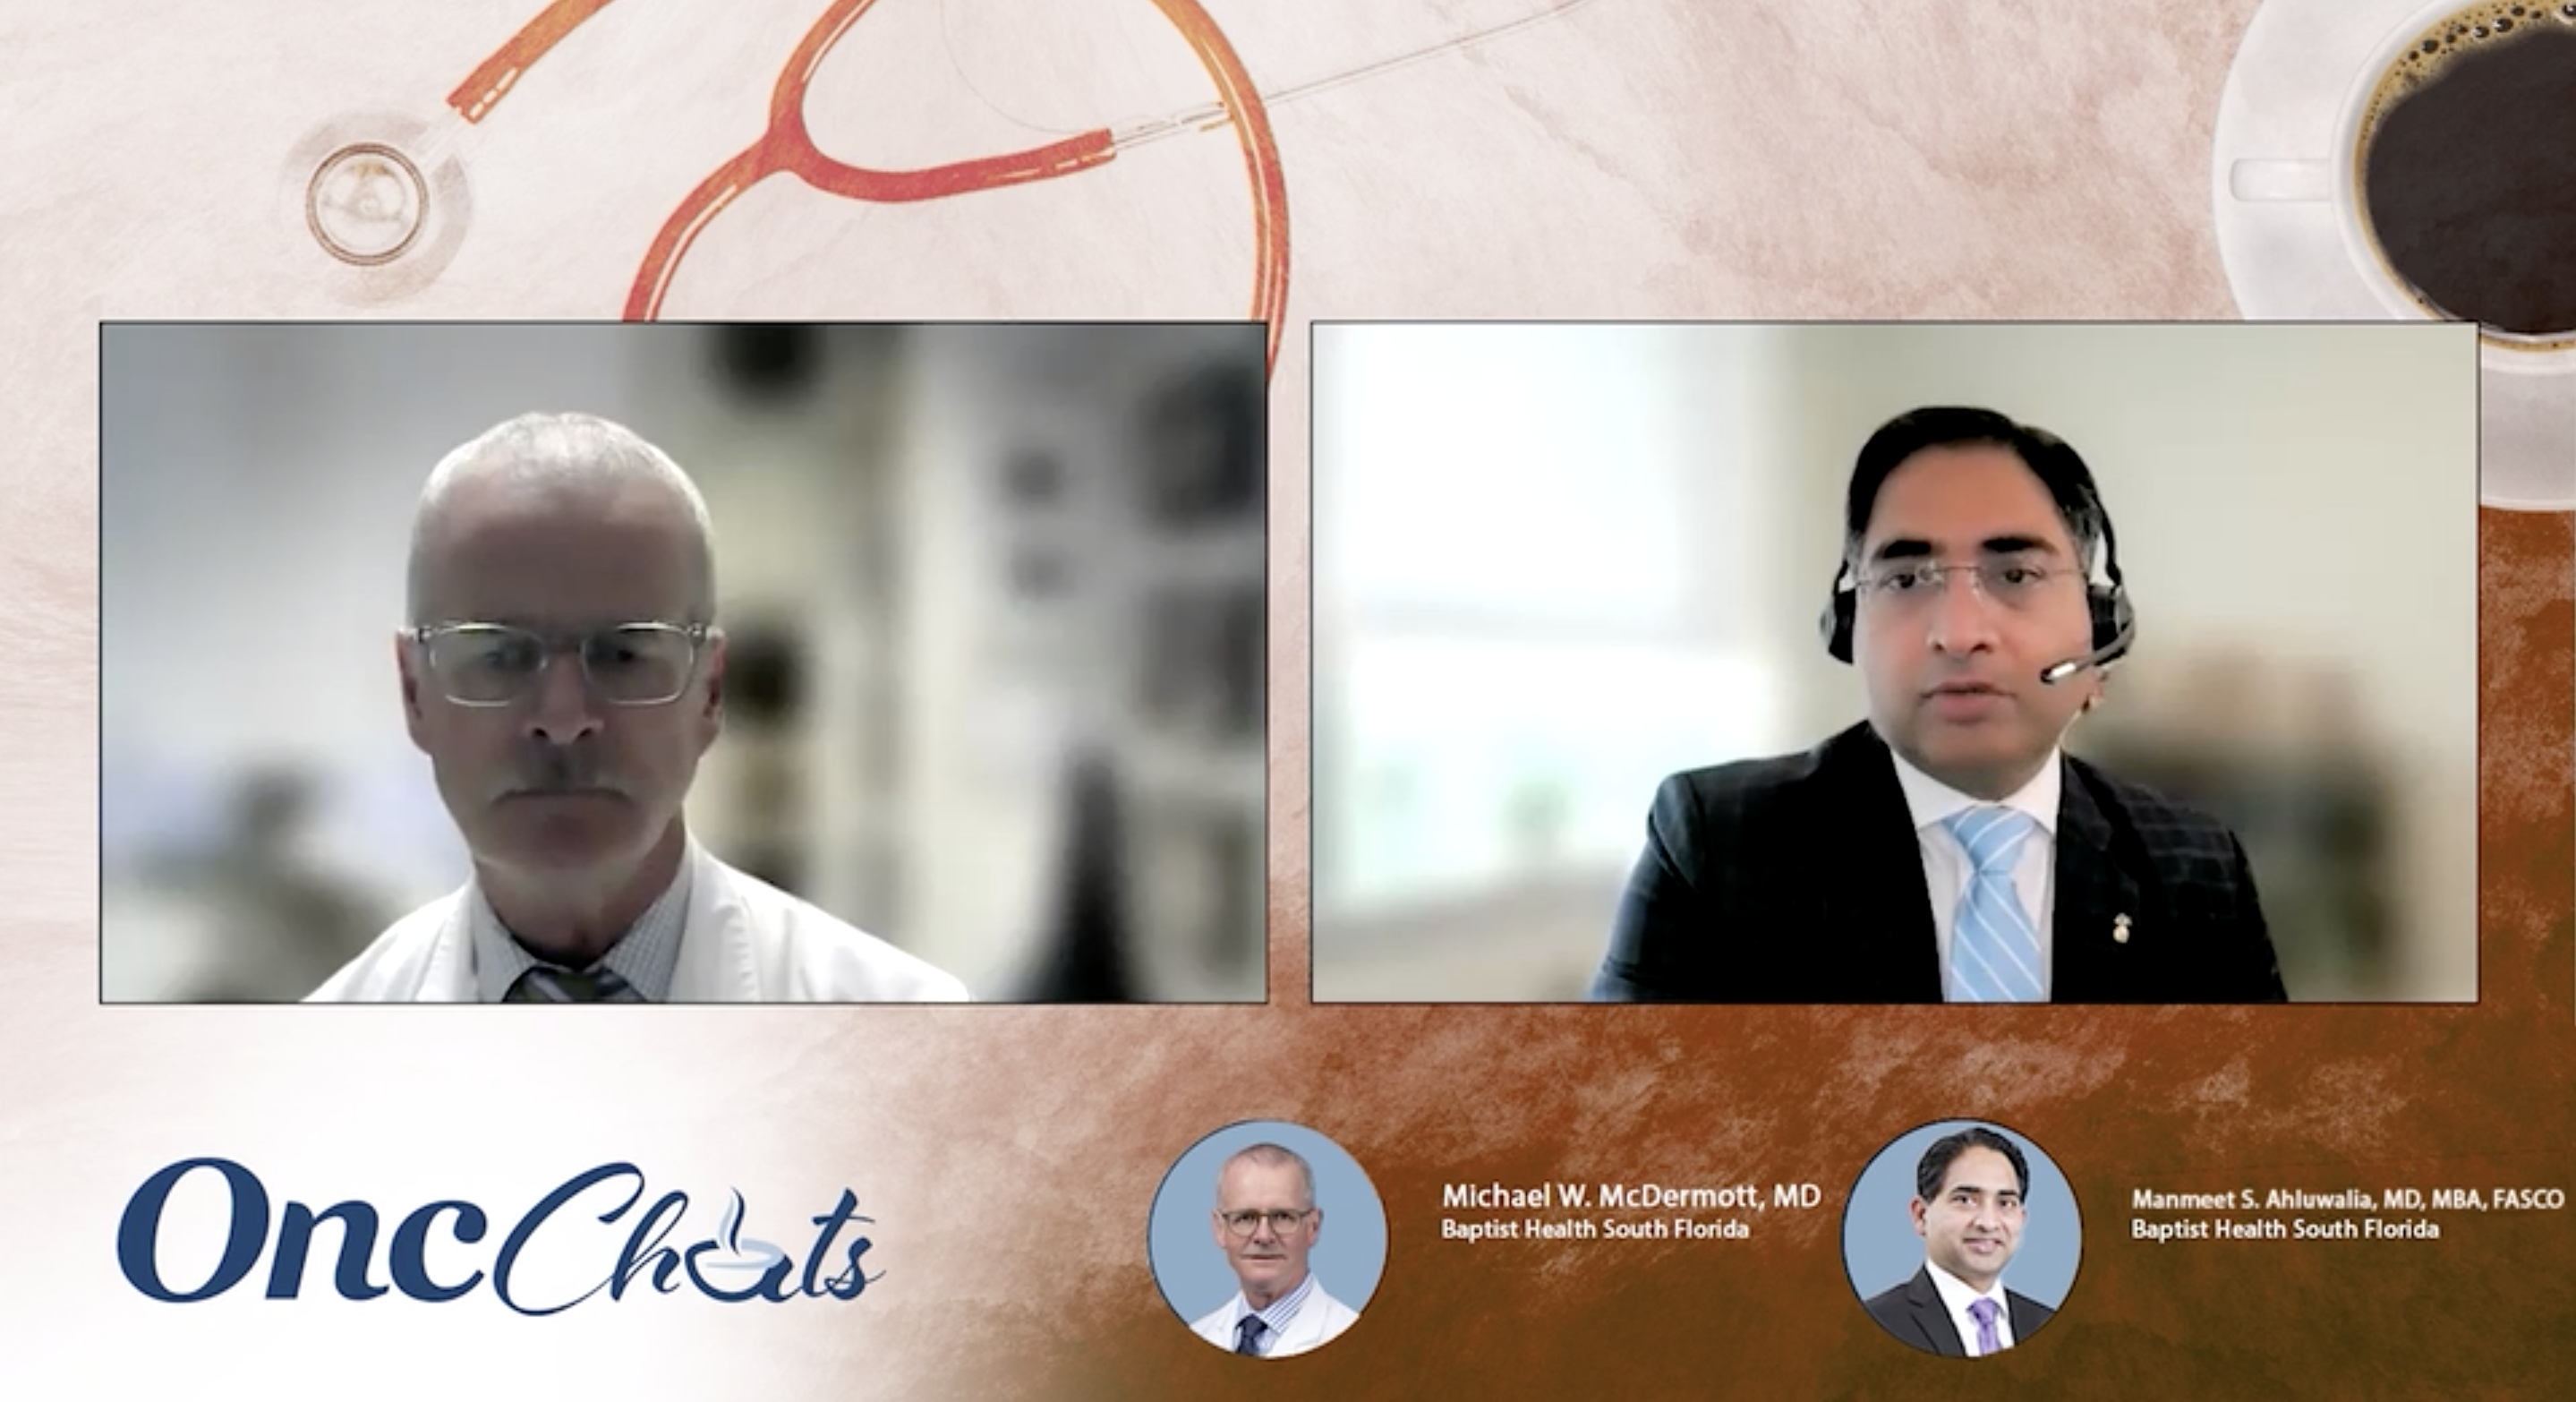 In this fourth episode of OncChats: Examining LIFU–Aided Liquid Biopsy in Glioblastoma, Manmeet Singh Ahluwalia, MD, and Michael W. McDermott, MD, discuss the key objectives of the phase 3 LIMITLESS study (NCT05317858) examining low-intensity focused ultrasound with immunotherapy and chemotherapy in patients with lung cancer and brain metastases.